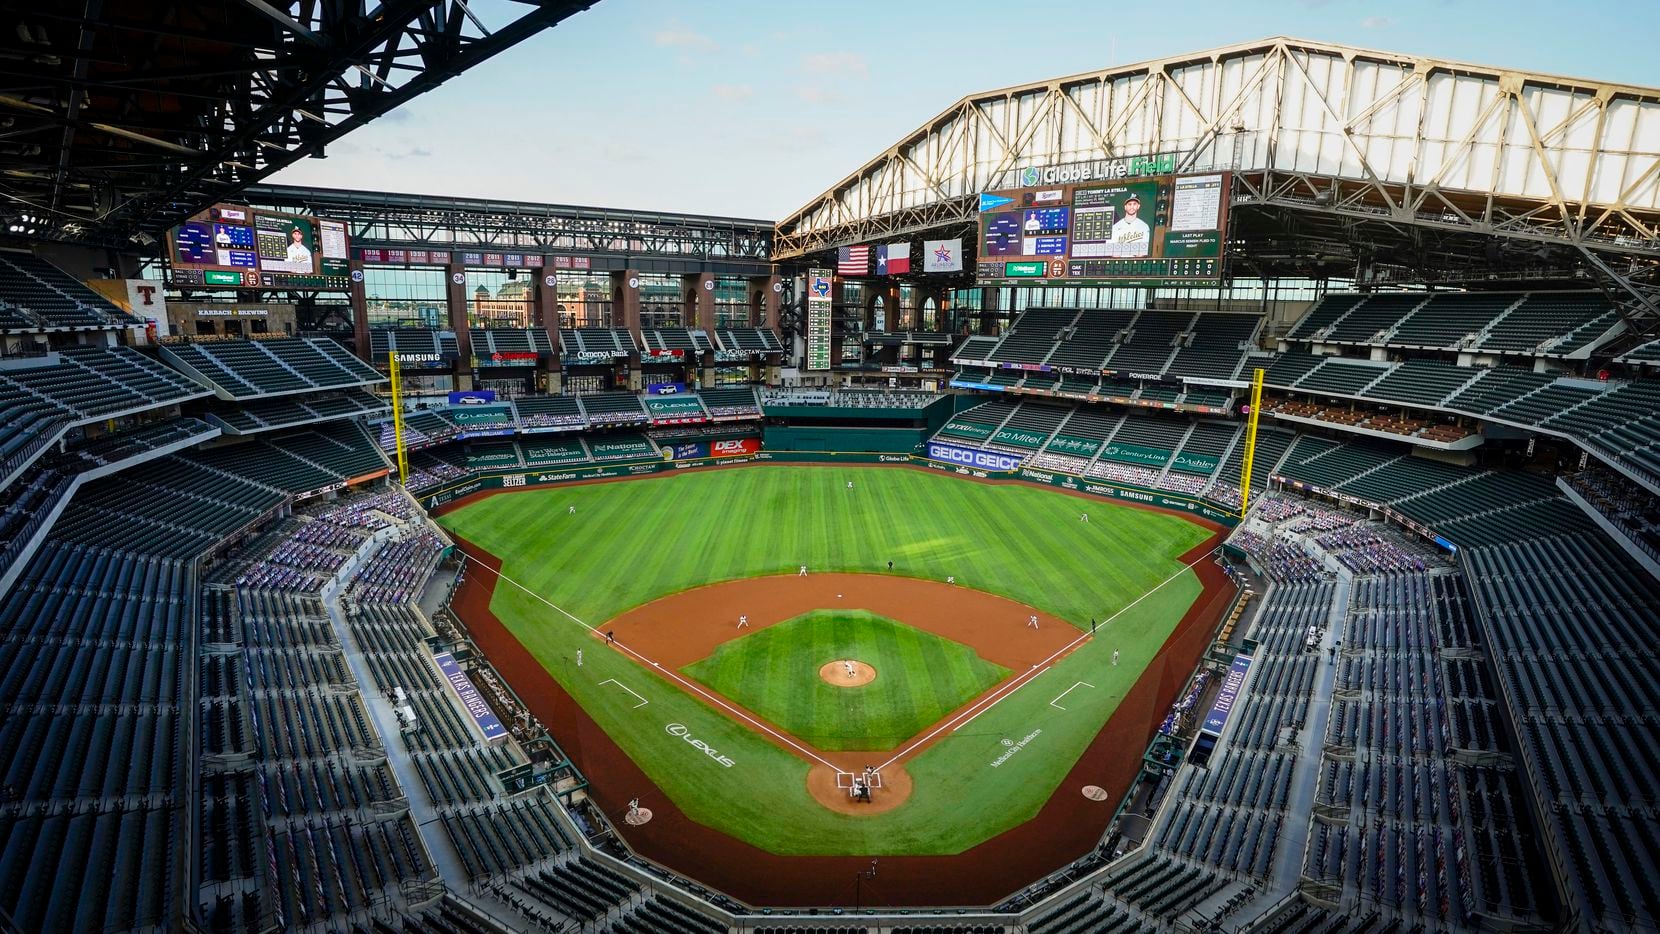 The Texas Rangers face the Oakland Athletics with the roof open during the first inning of game two of a double header at Globe Life Field on Saturday, Sept. 12, 2020. (Smiley N. Pool/The Dallas Morning News)